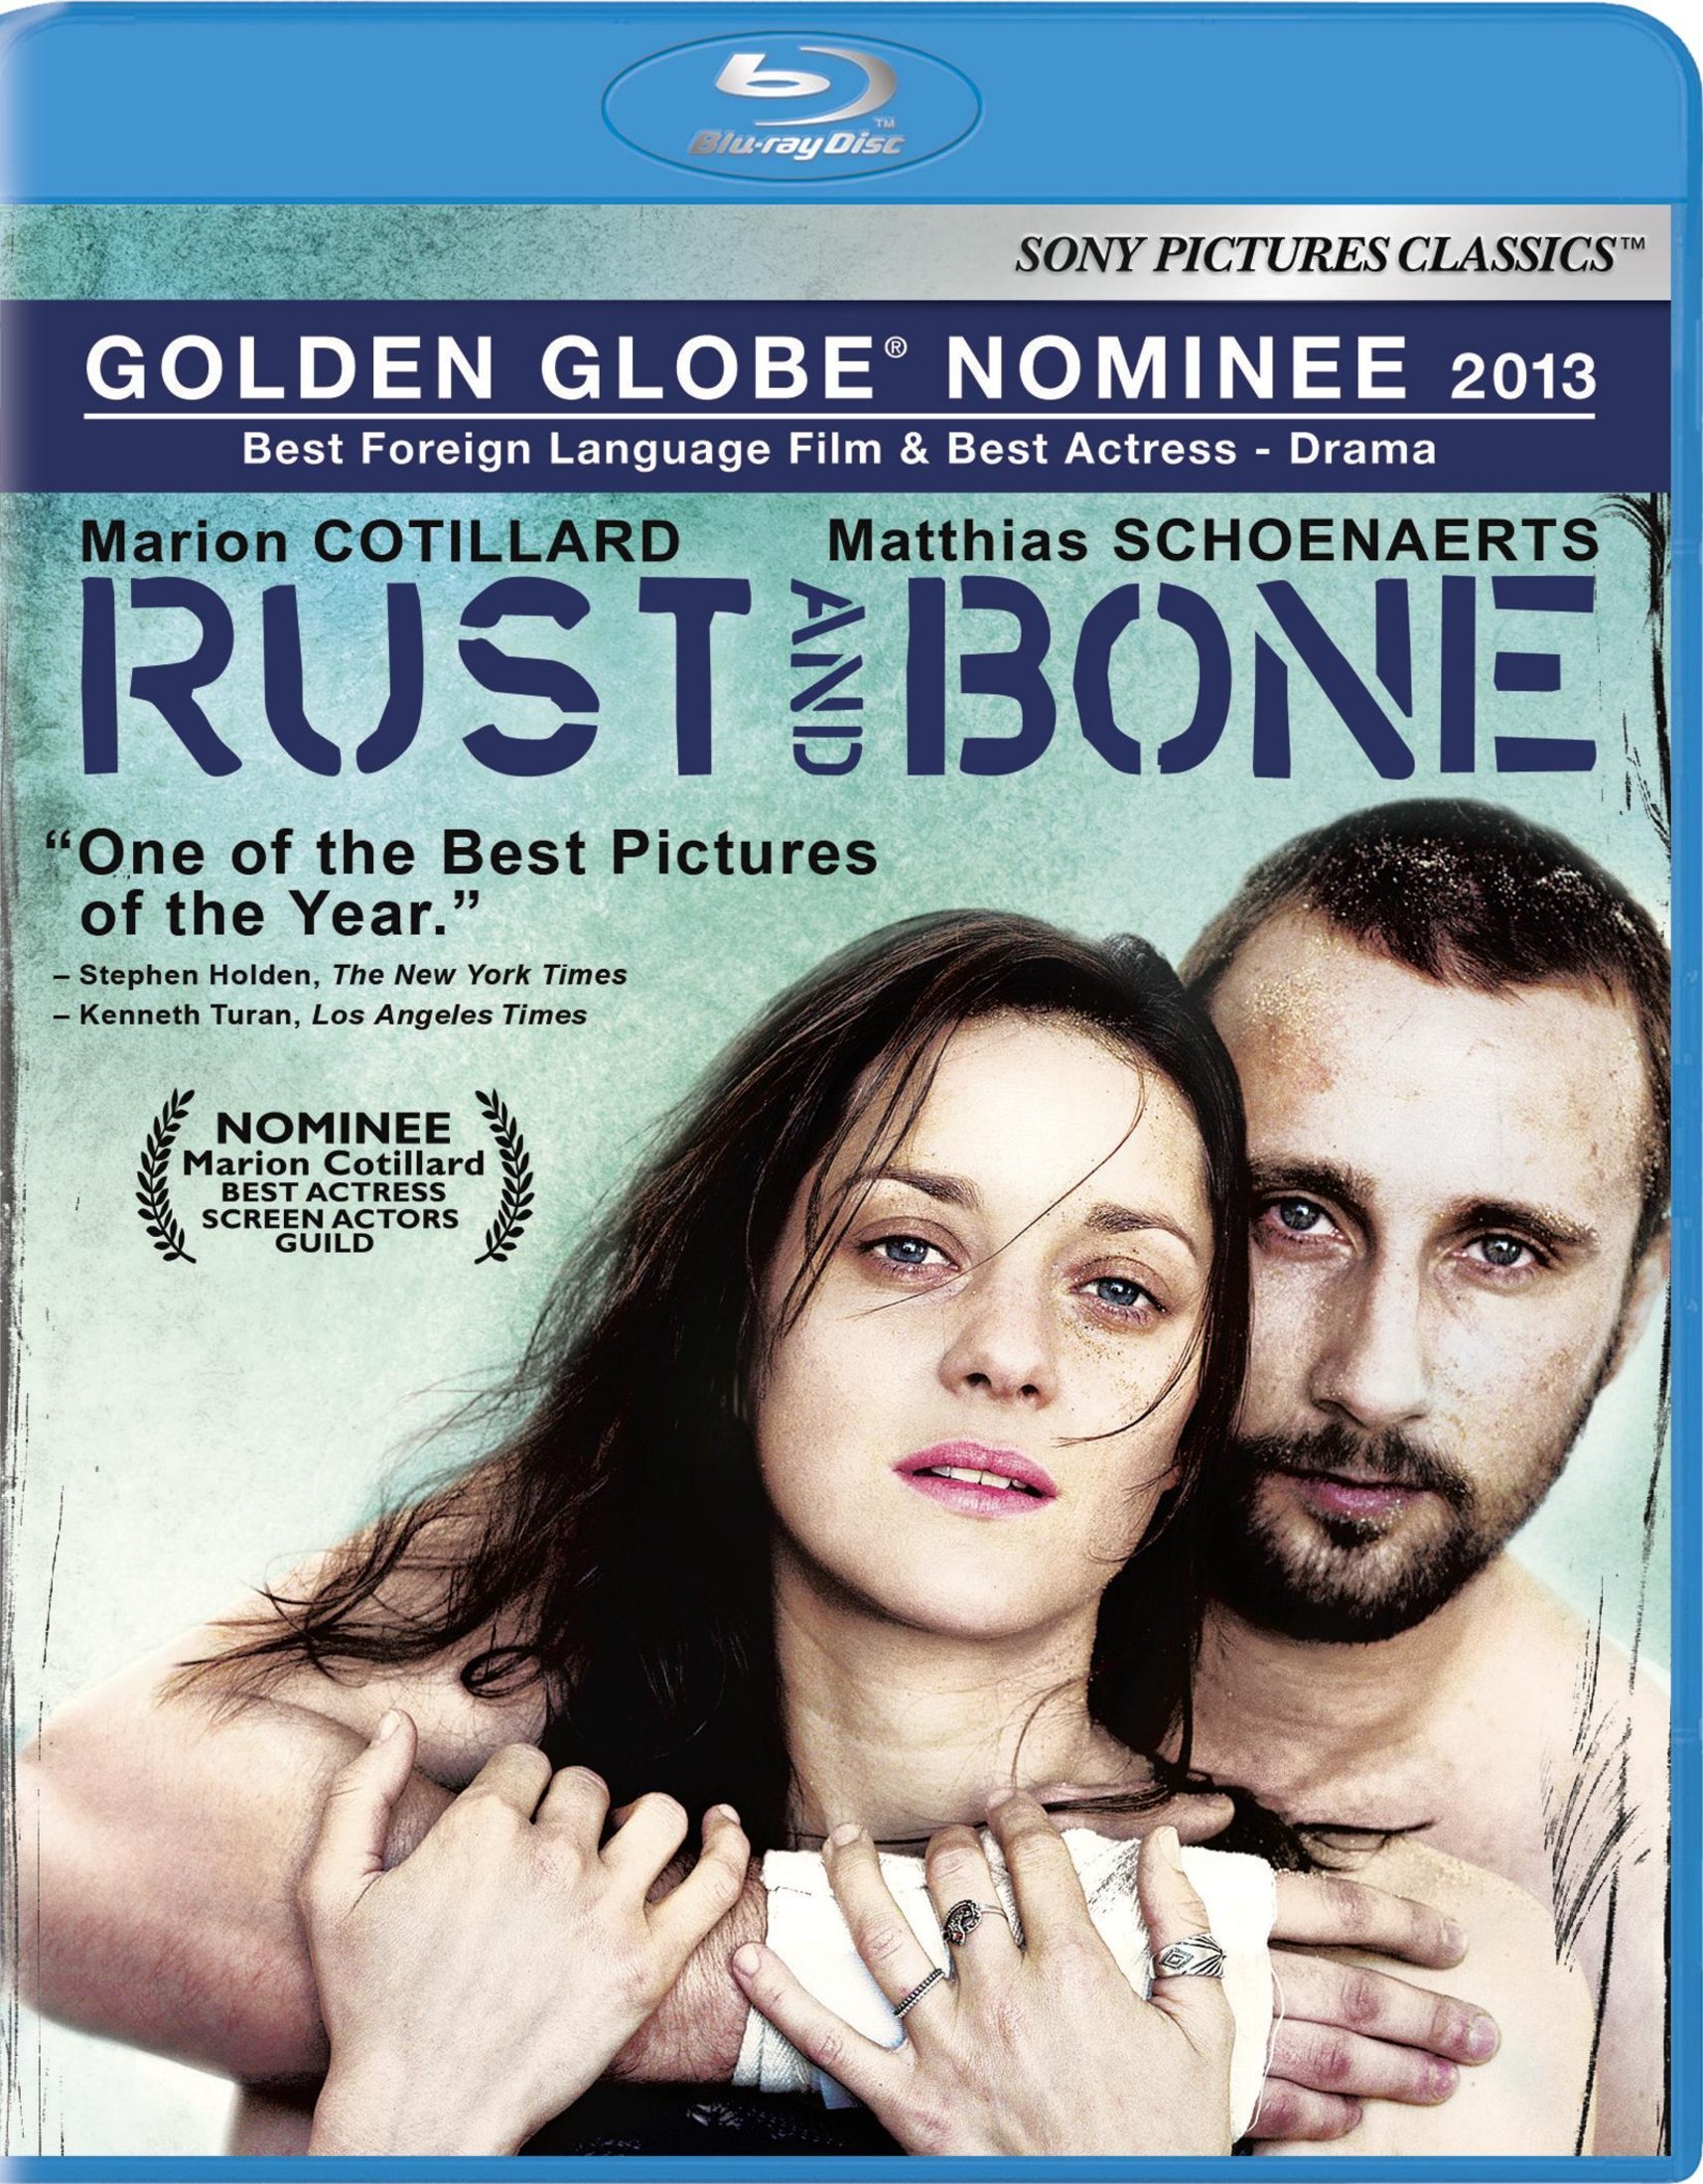 From rust and bone фото 25